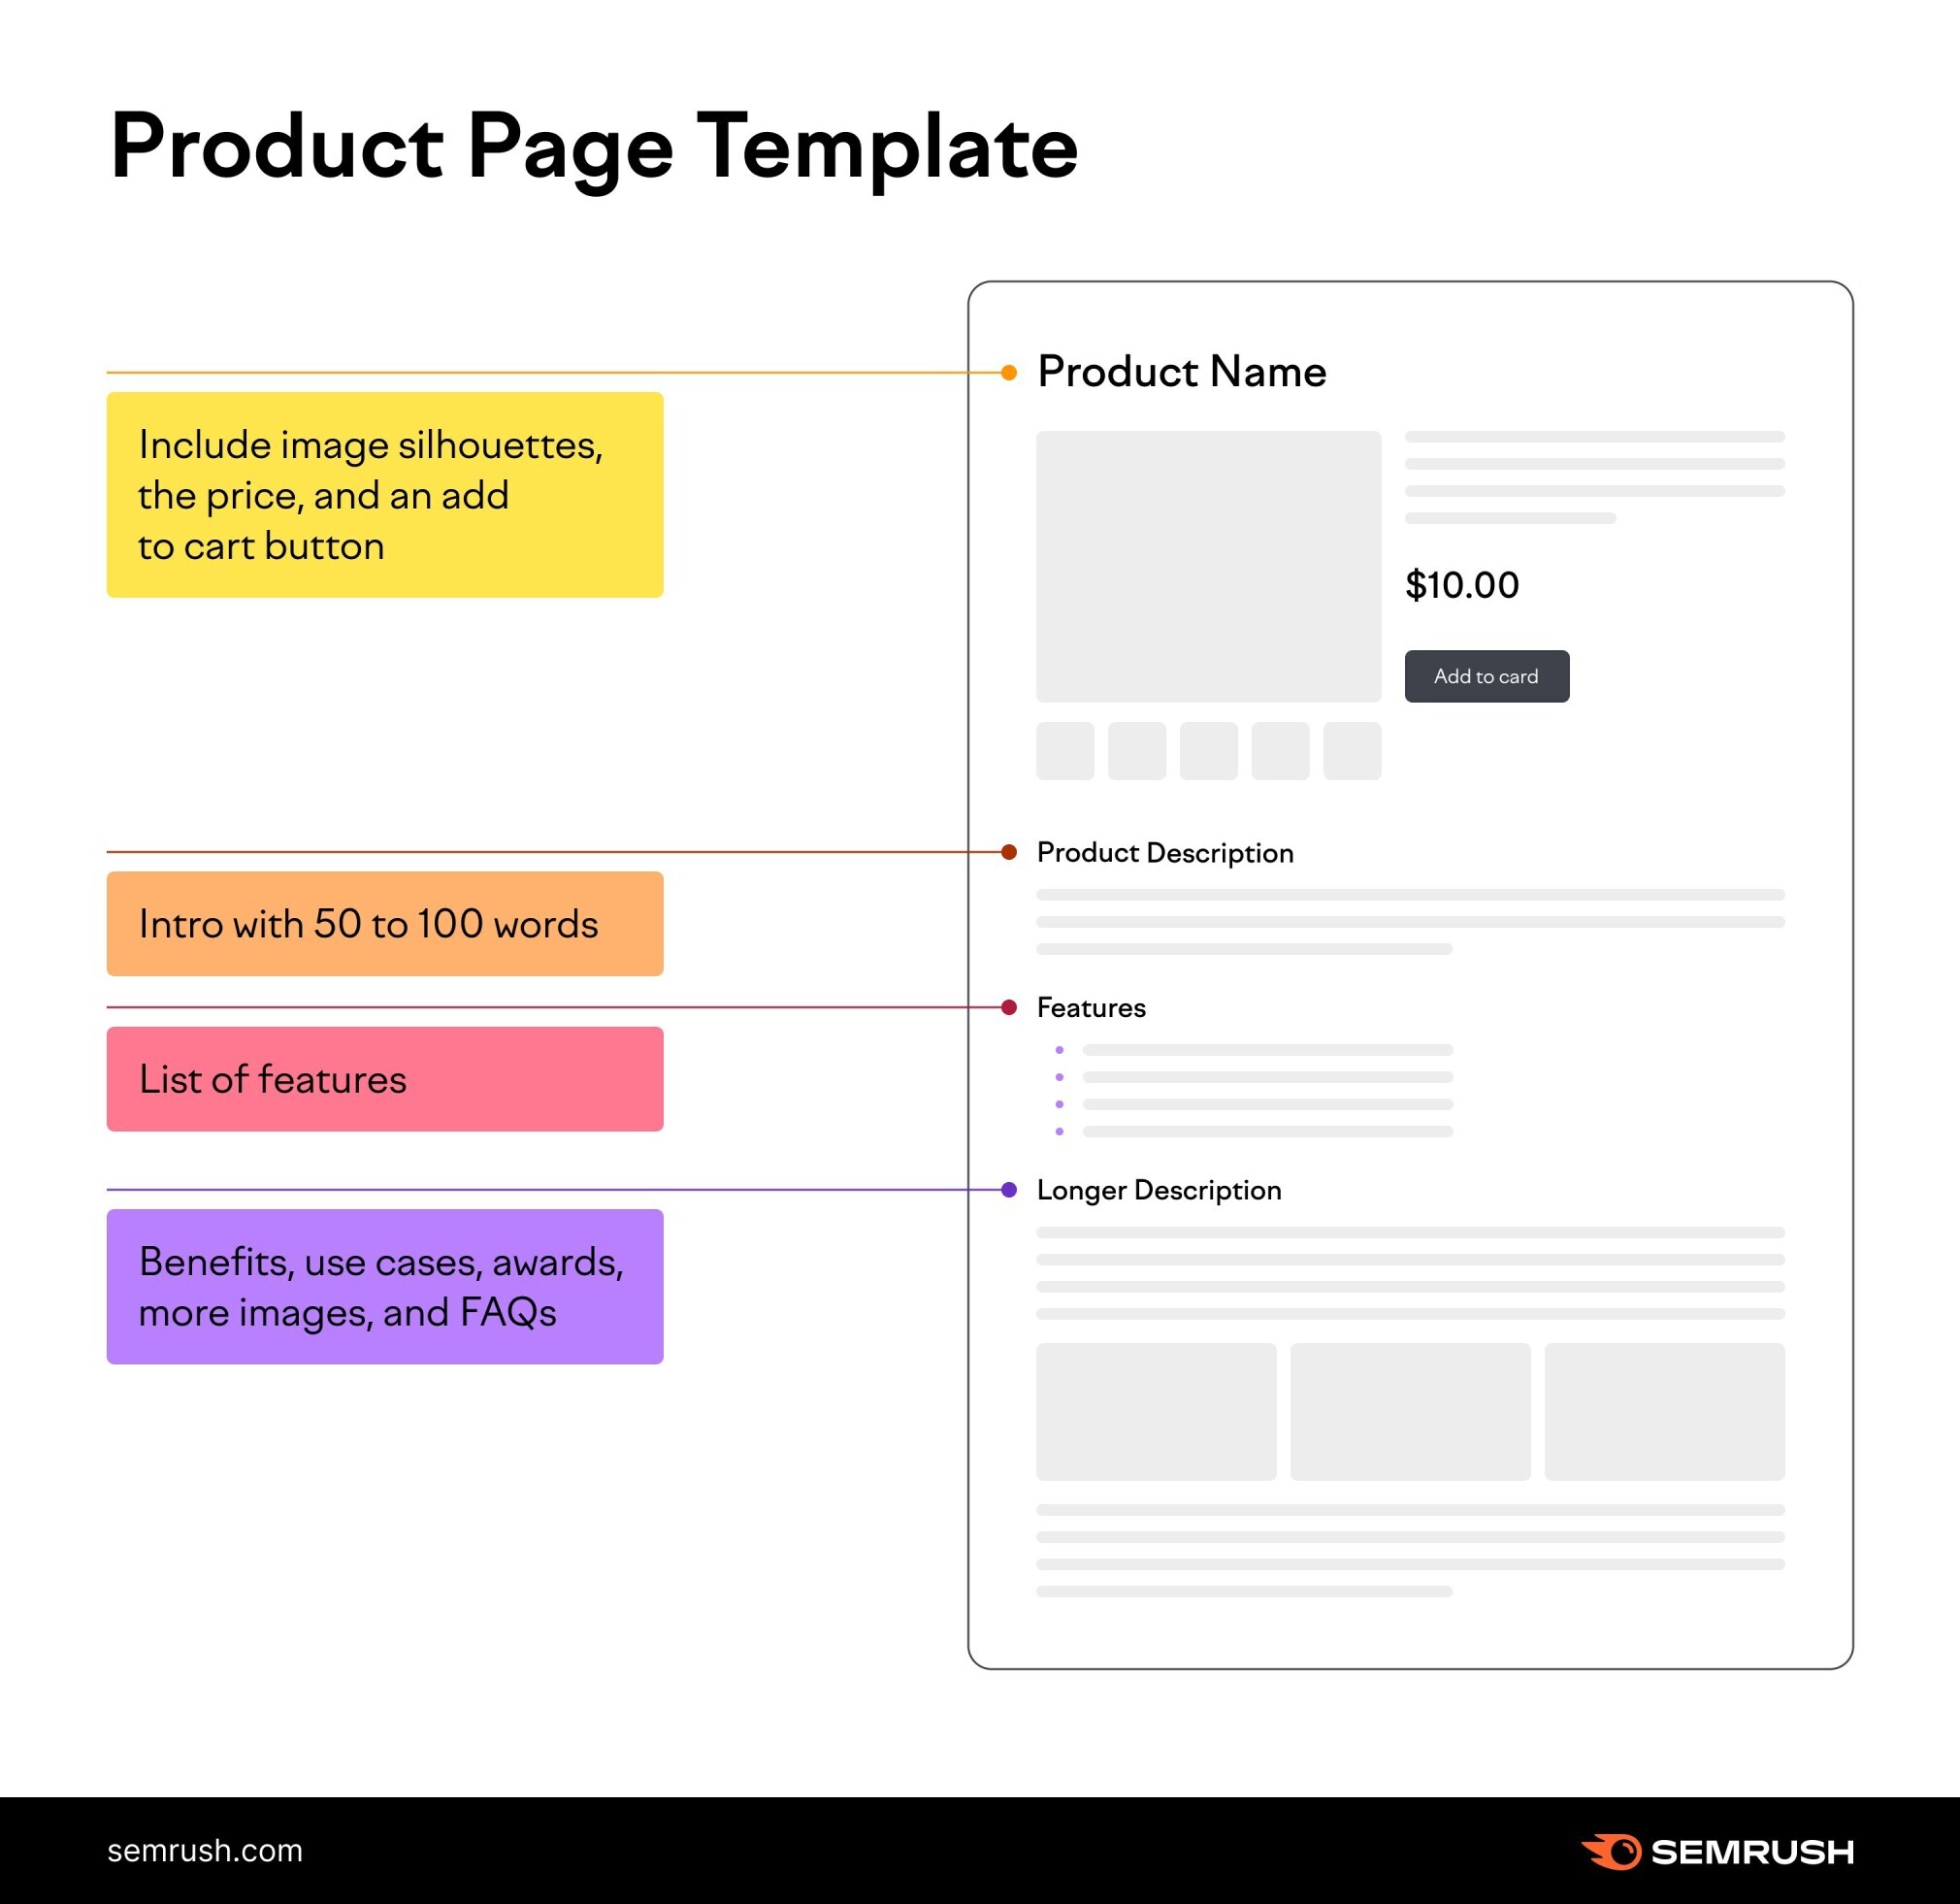 Downloadable template for product pages